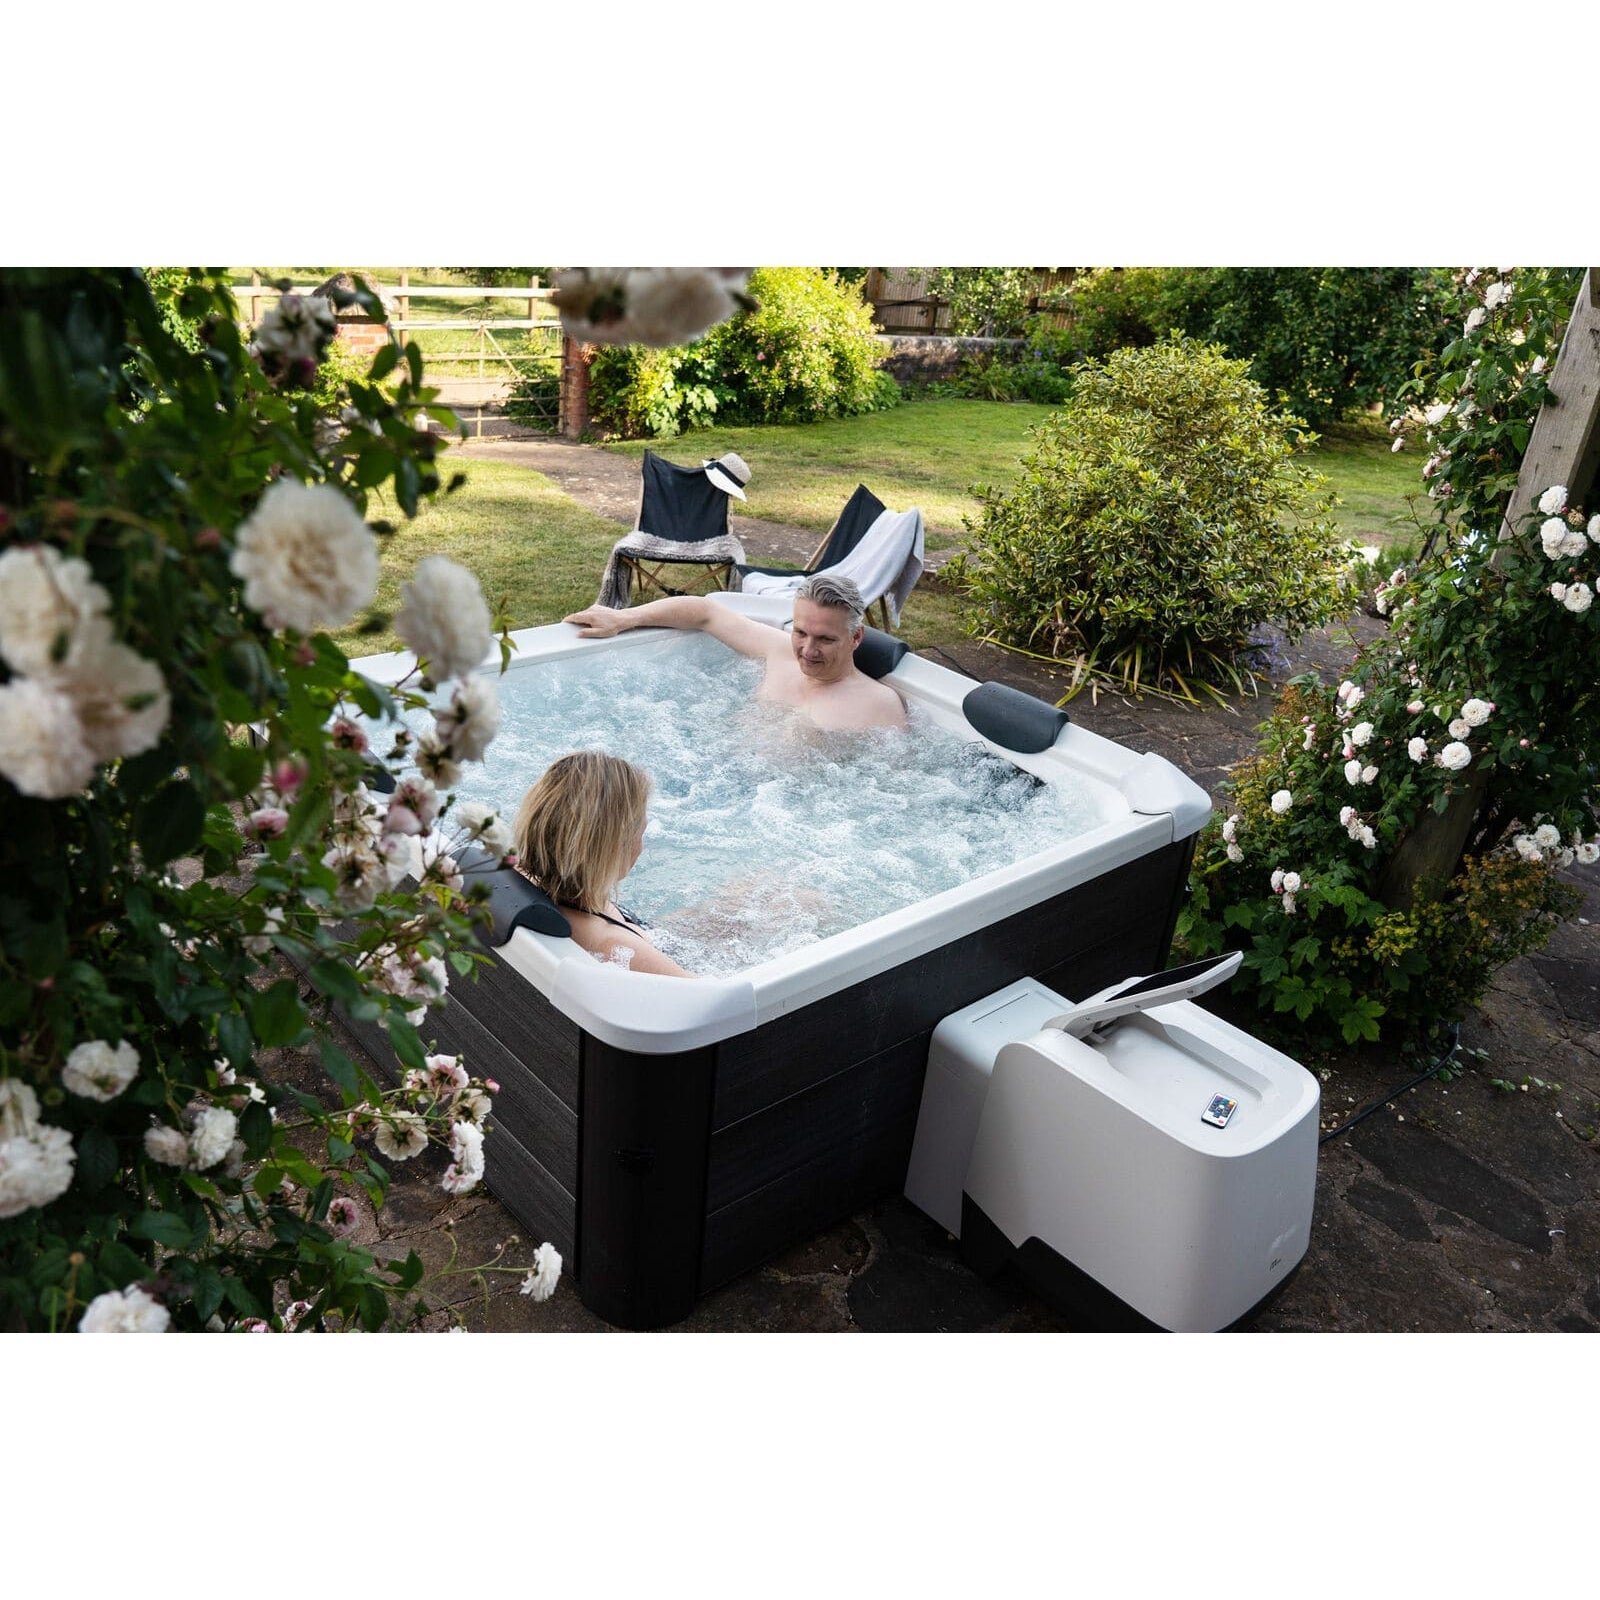 MSPA FRAME OSLO 6 Person Spa Hot Tub Spa - Purely Relaxation